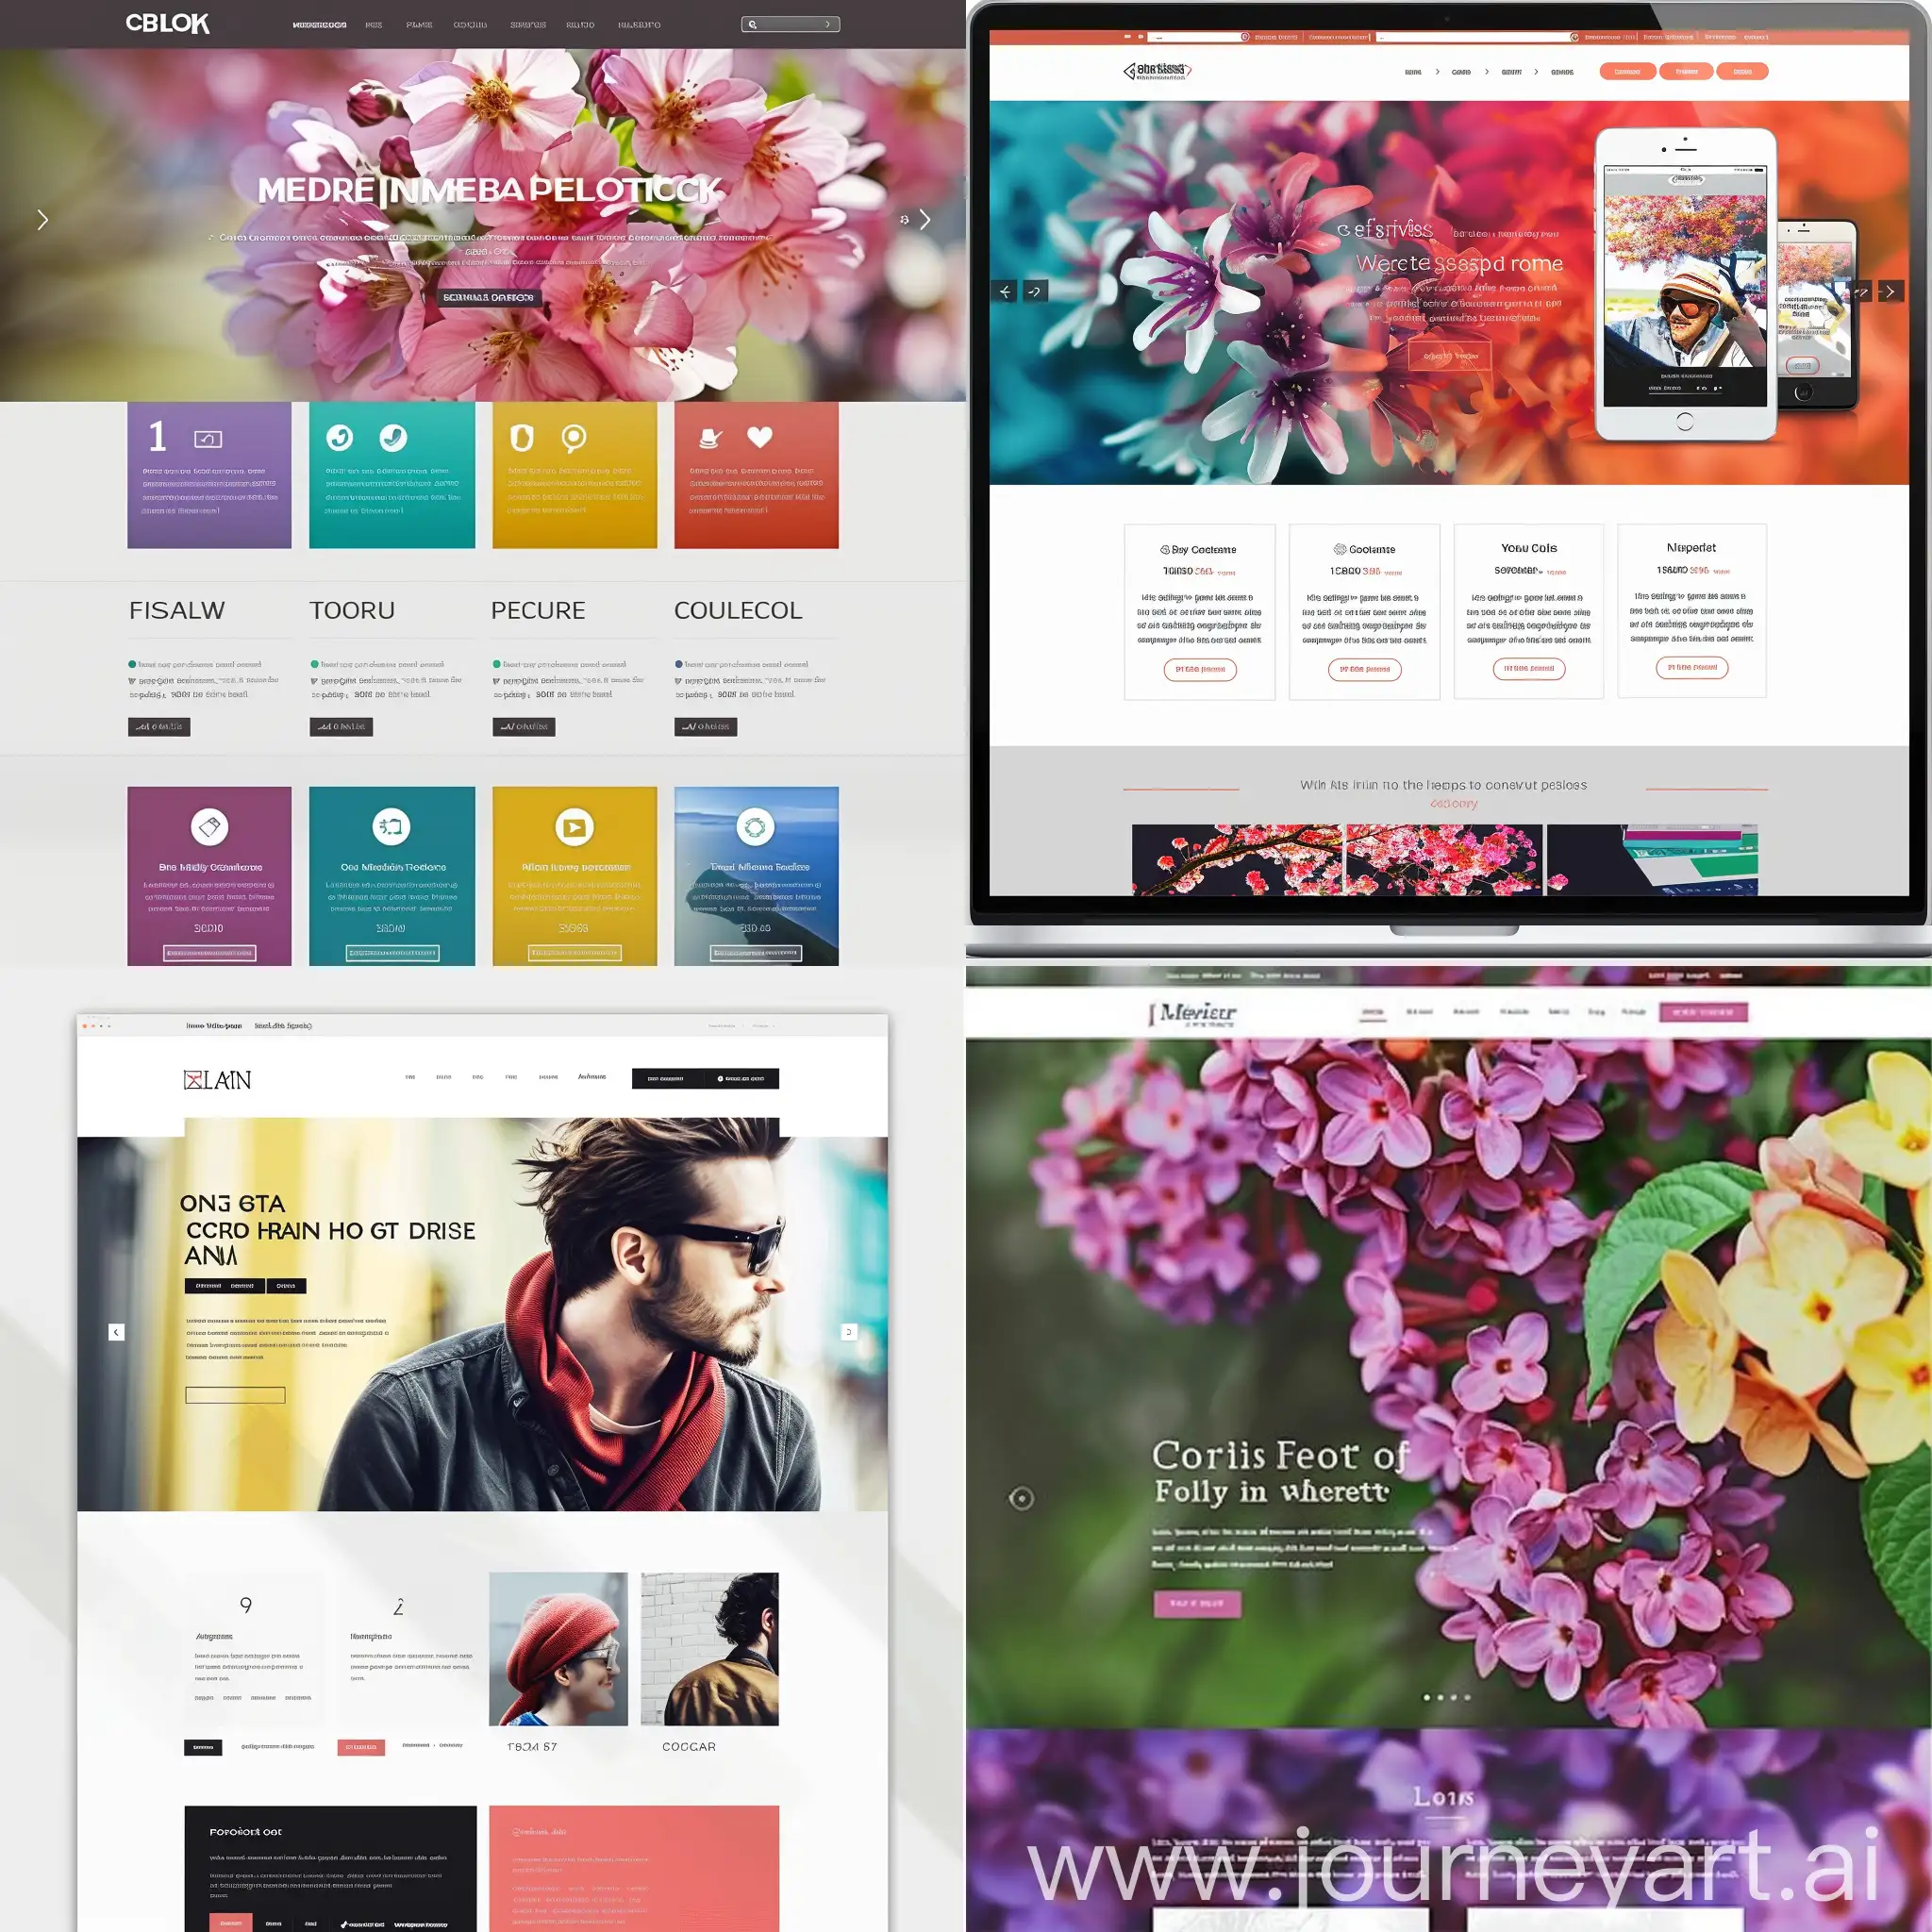 please create a website template, the colors pallet colors are: 